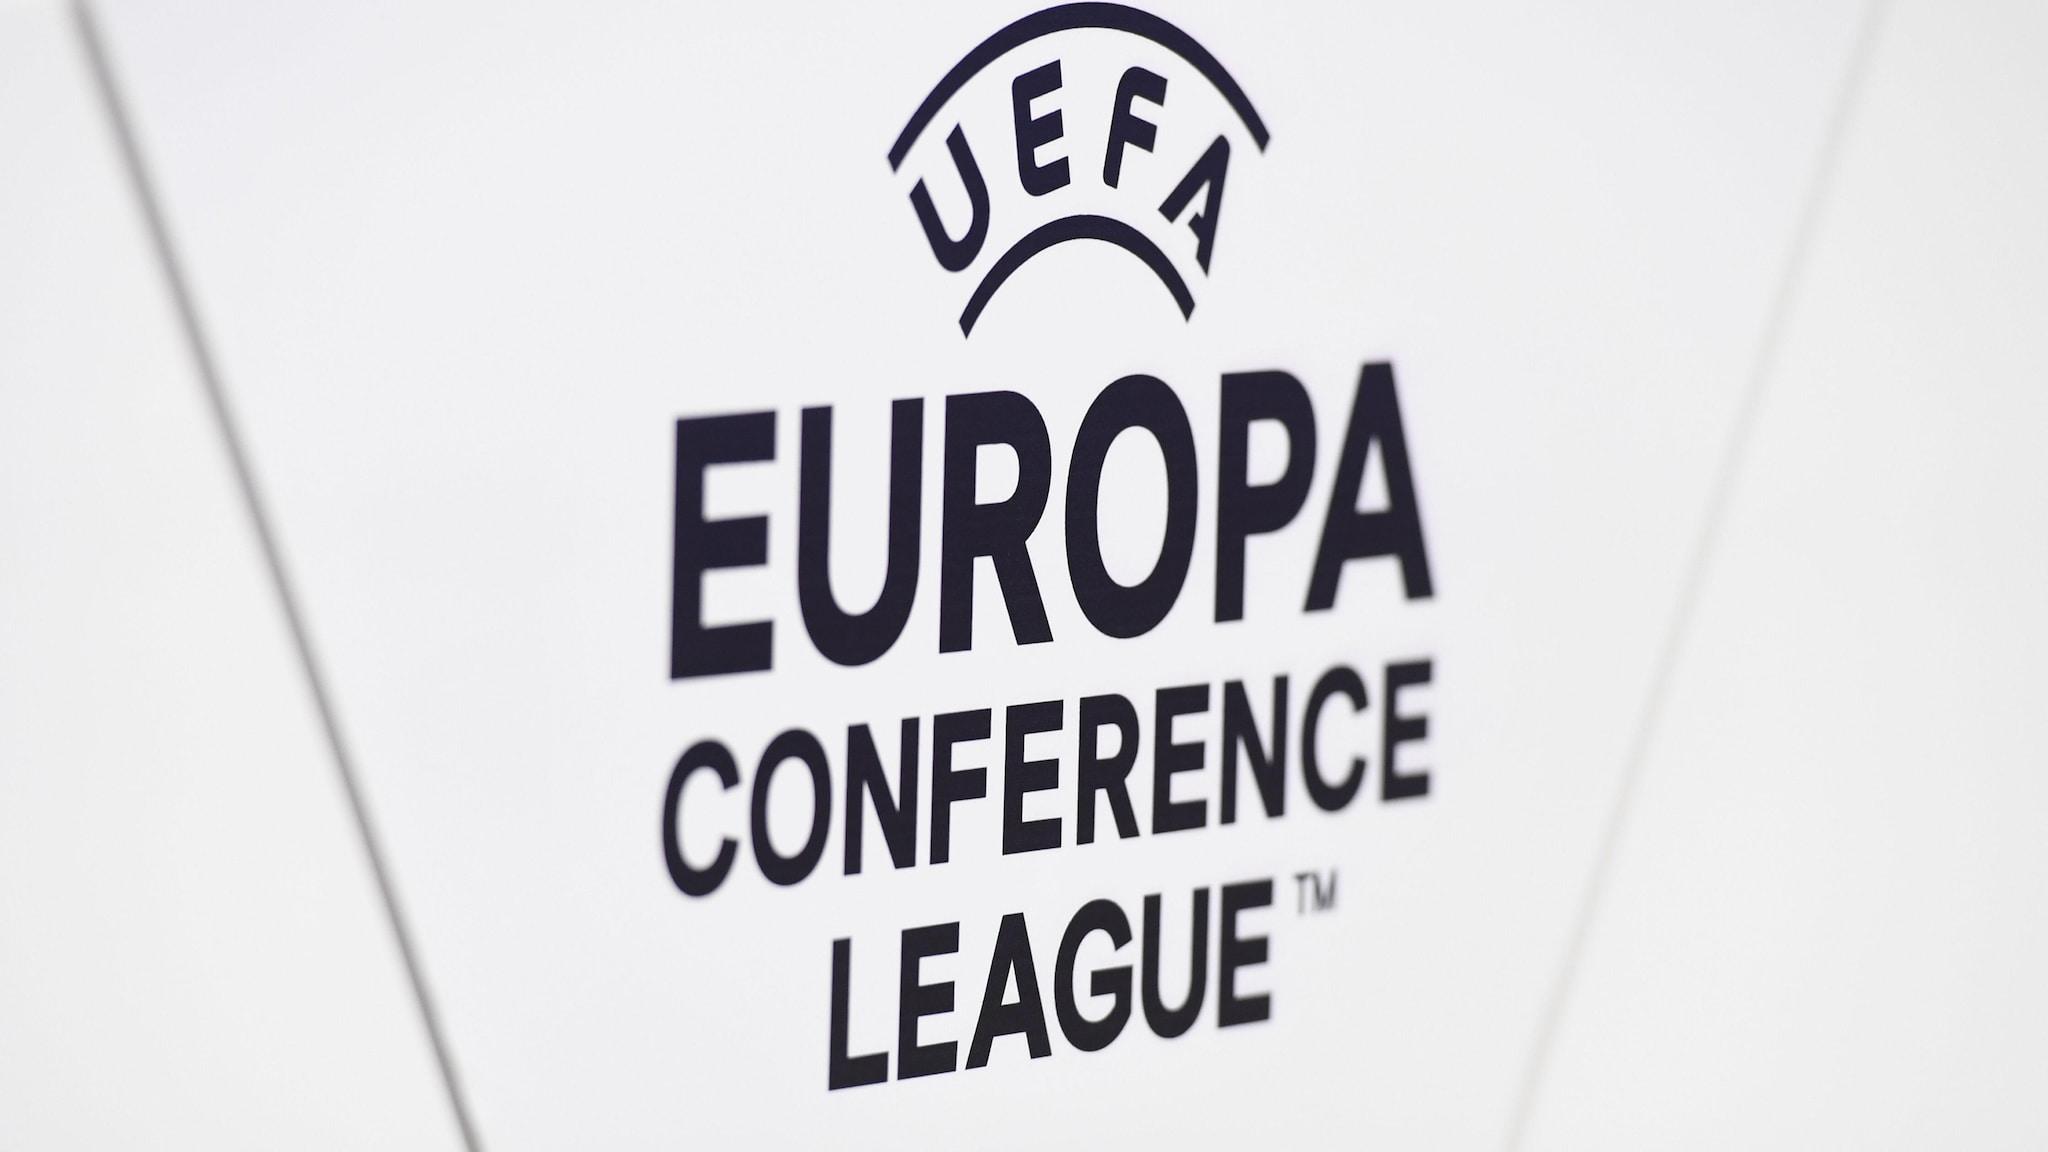 UEFA Europa Conference League: The New Addition to European Club Competitions